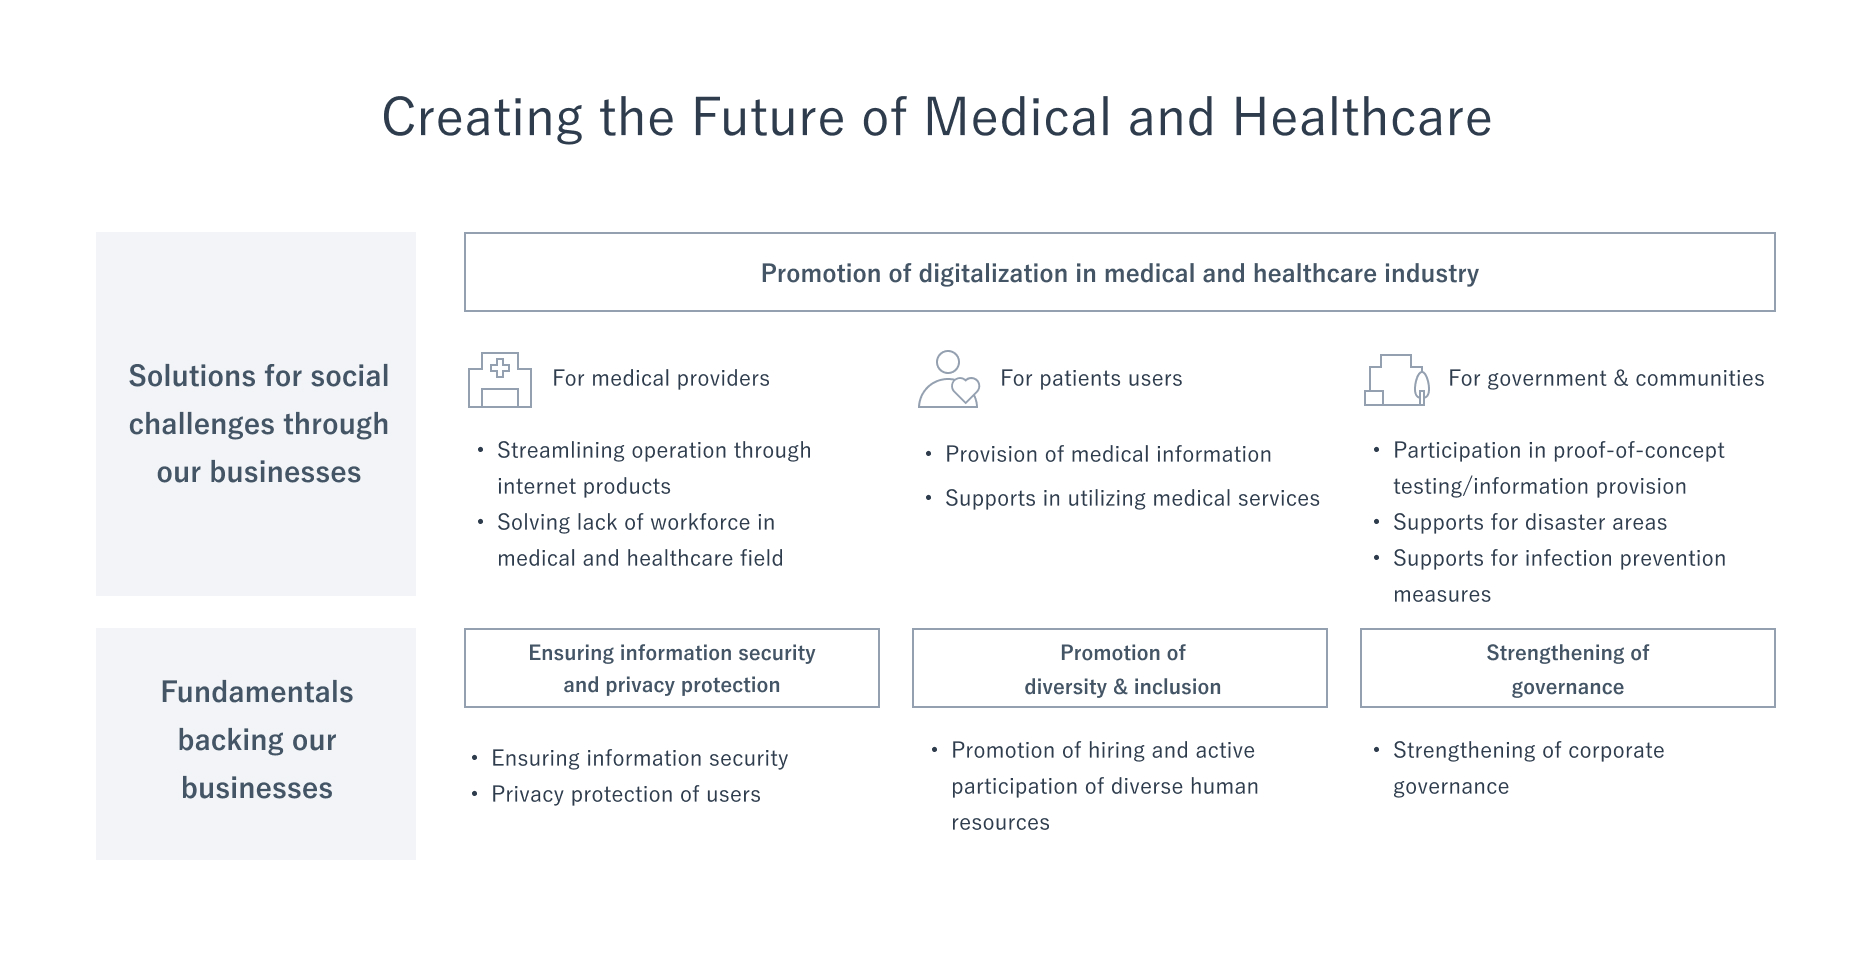 Creating the Future of Medical and Healthcare